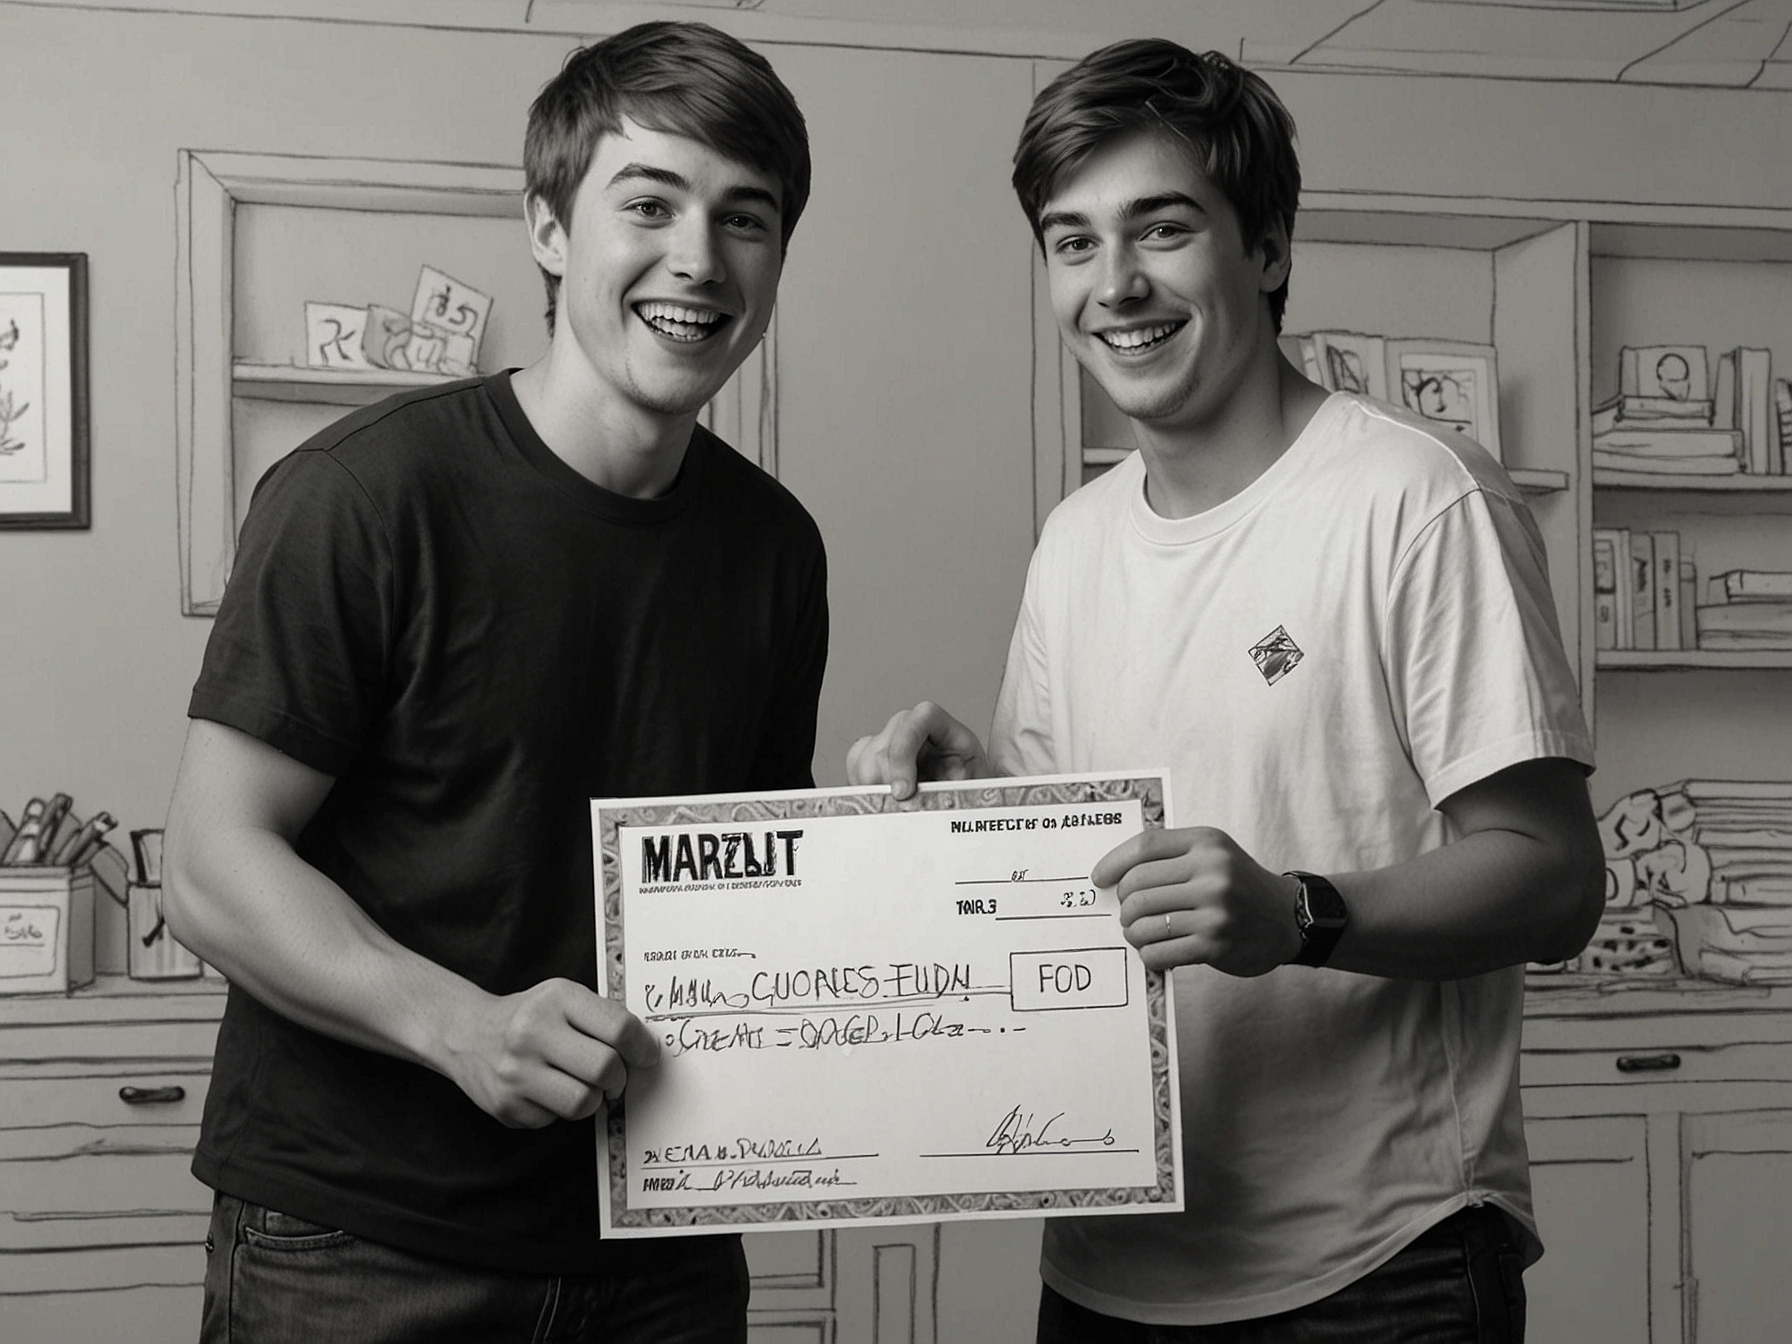 An image of MrBeast presenting a large check to a random person, capturing their astonished and joyful reaction, symbolizing the surprise element that captivates viewers.